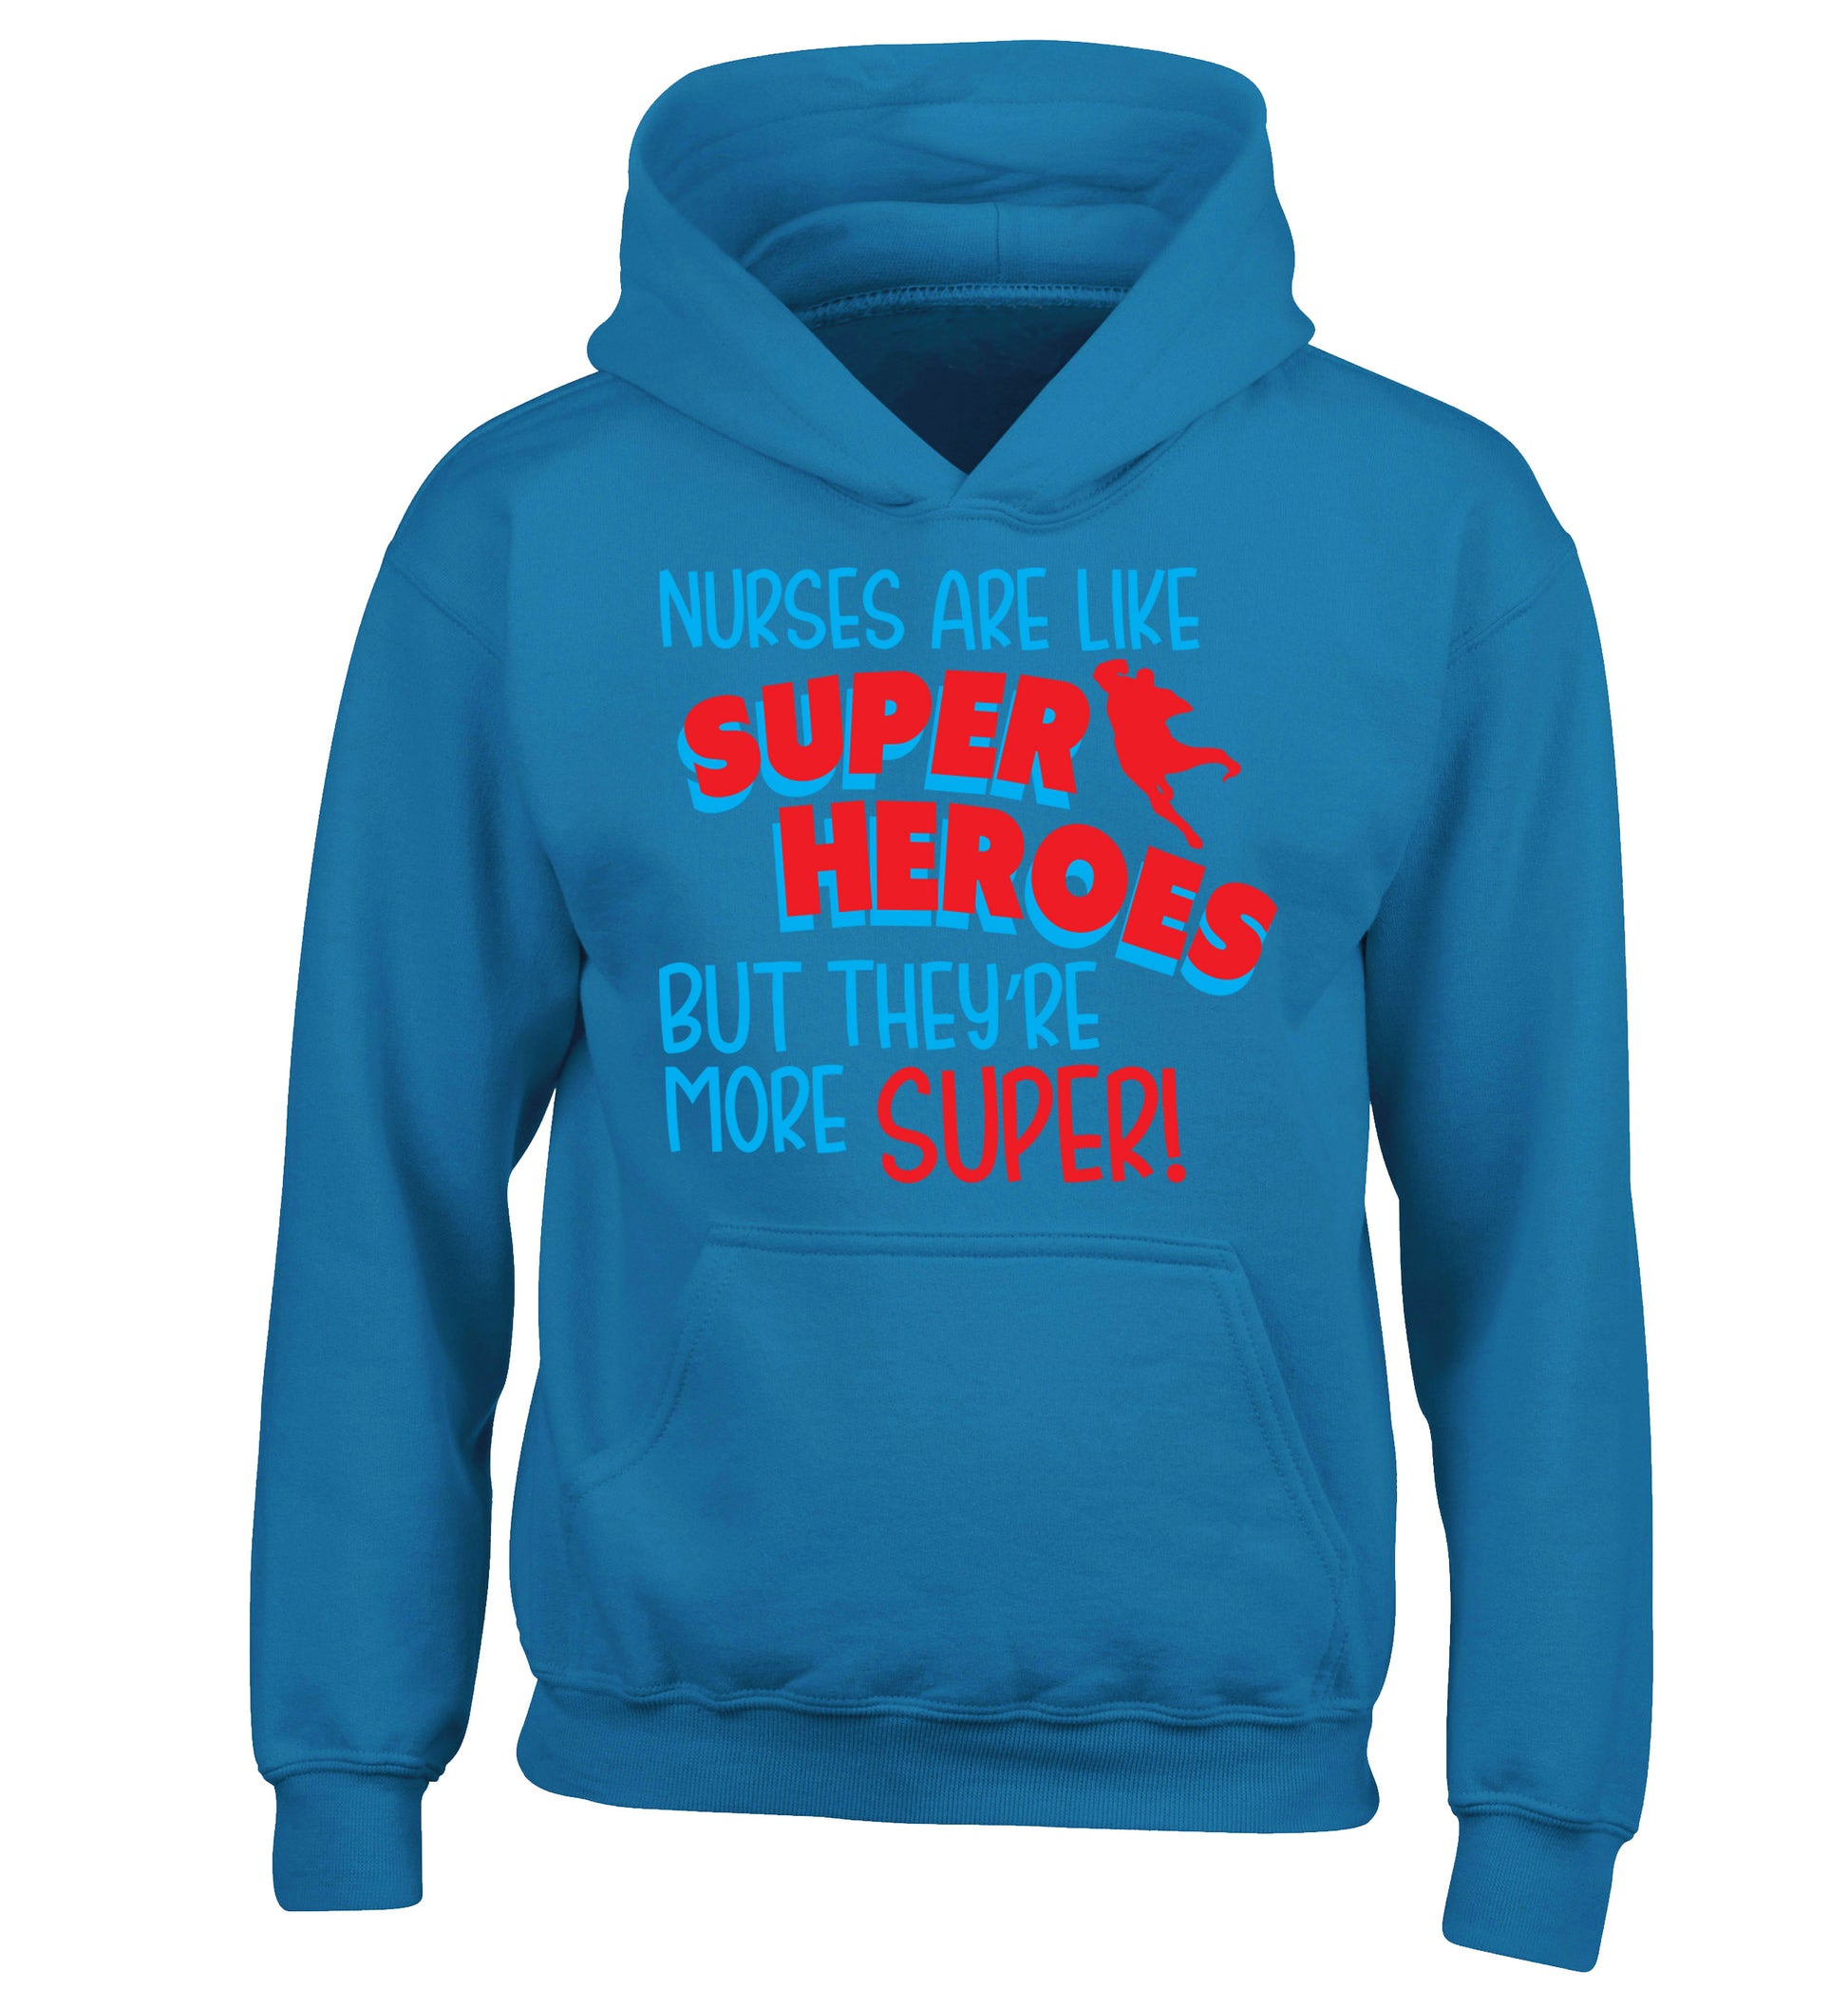 Nurses are like superheros but they're more super children's blue hoodie 12-13 Years